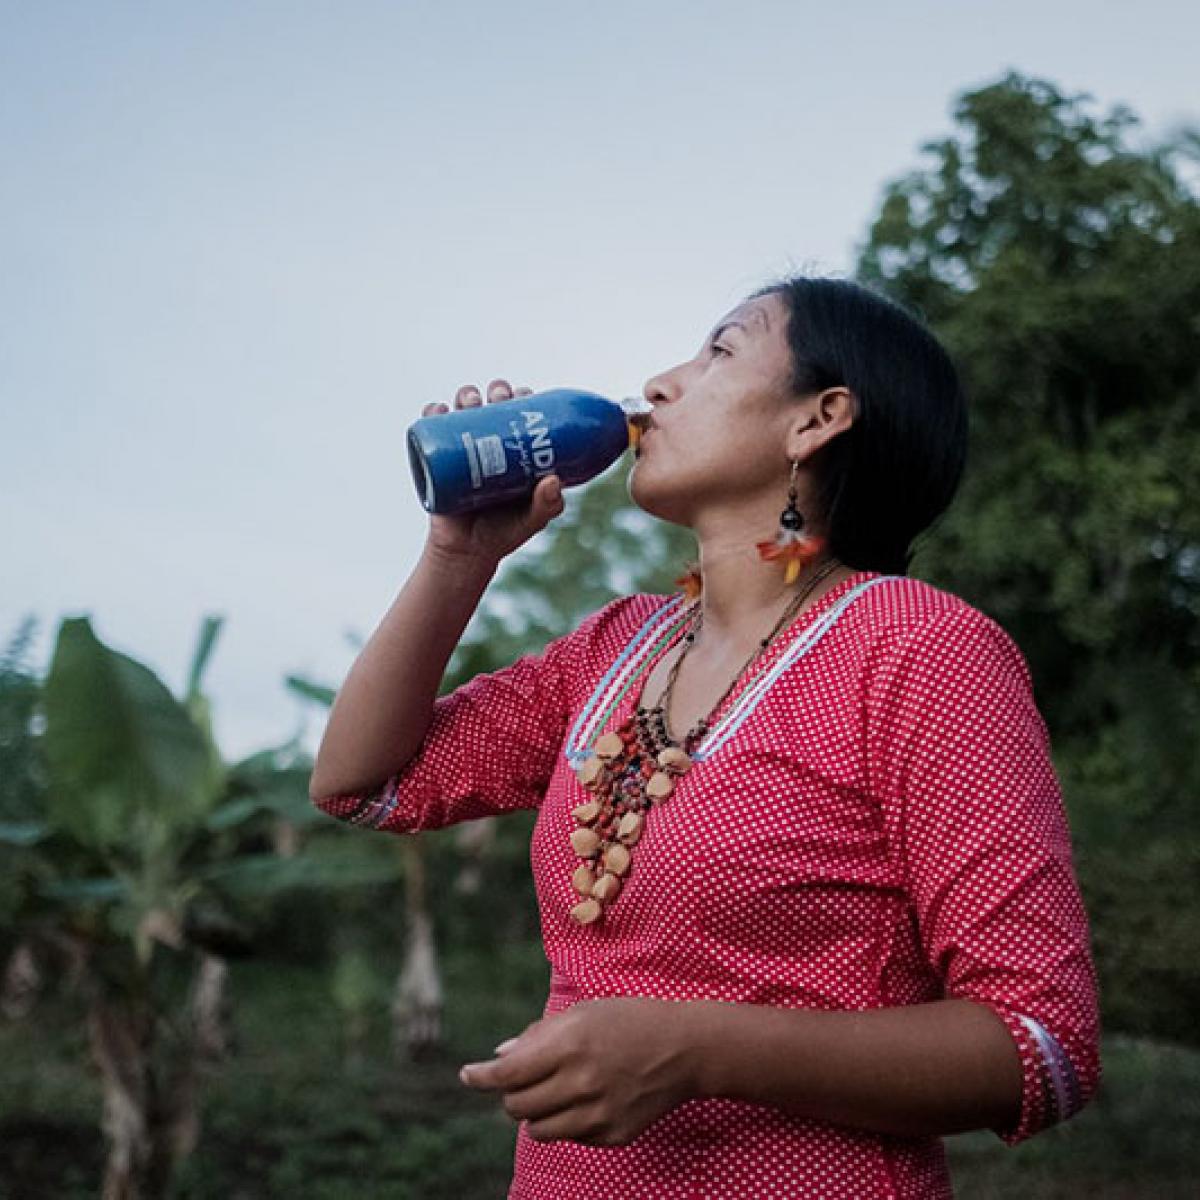 An indigenous woman drinking from a bottle of an Amazonian energizing beverage